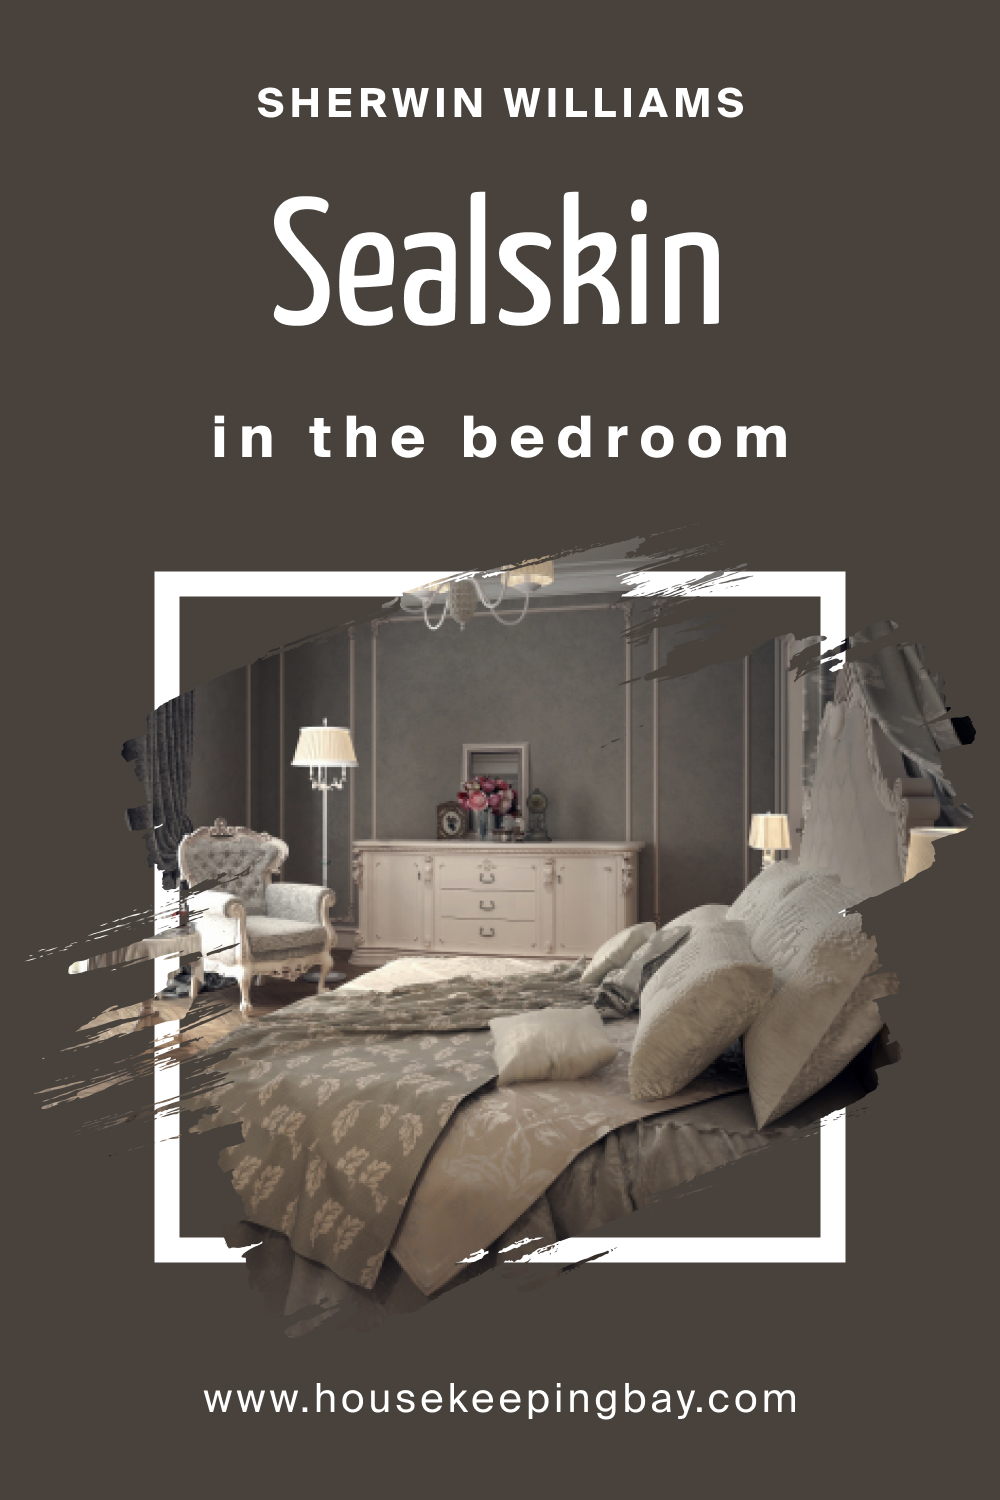 Sherwin Williams. SW 7675 Sealskin For the bedroom